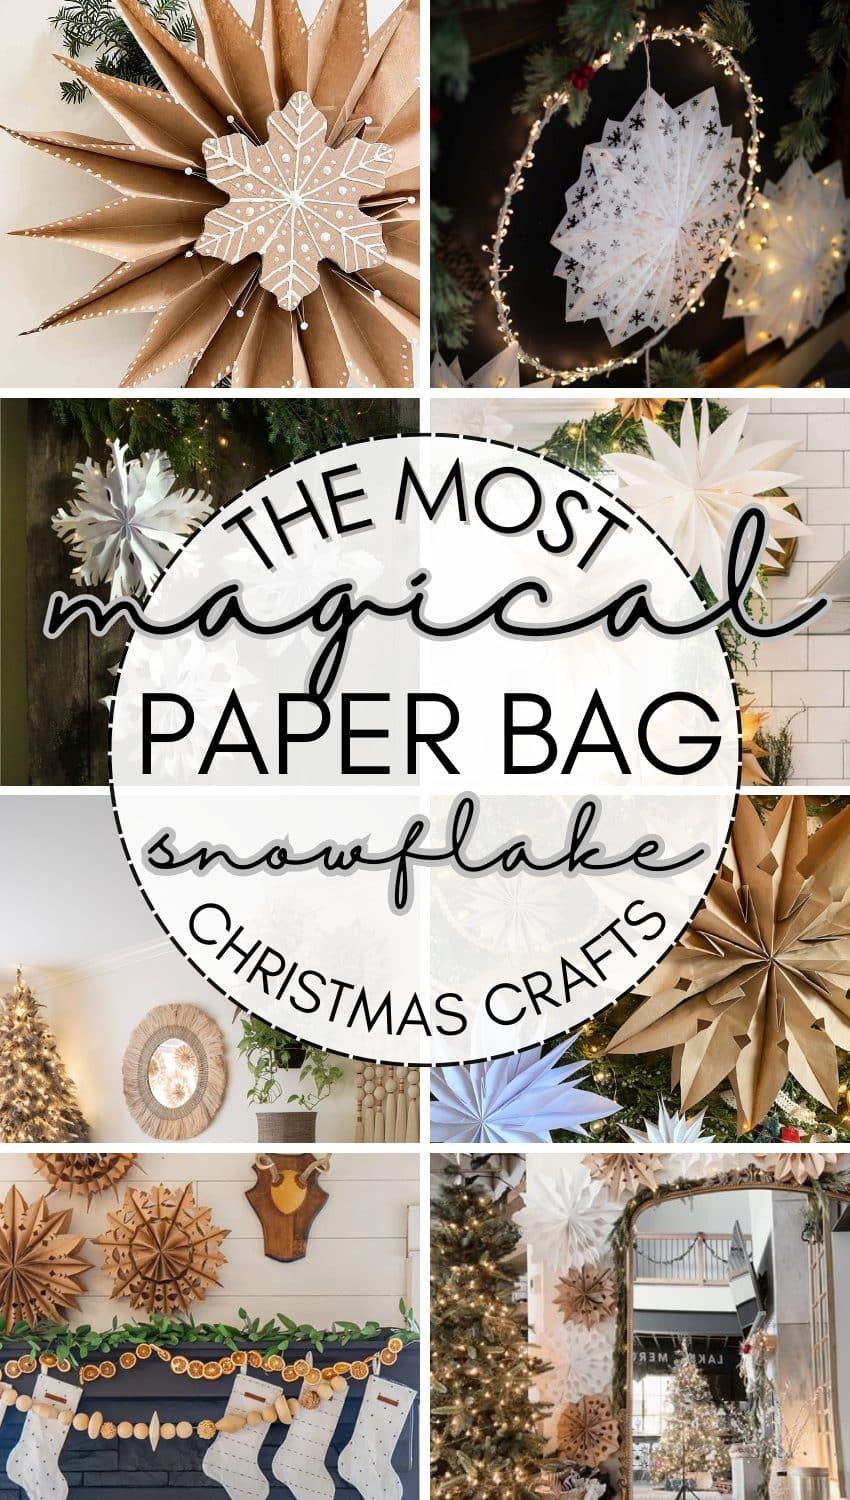 Paper Bag Snowflake Crafts for Christmas and Winter